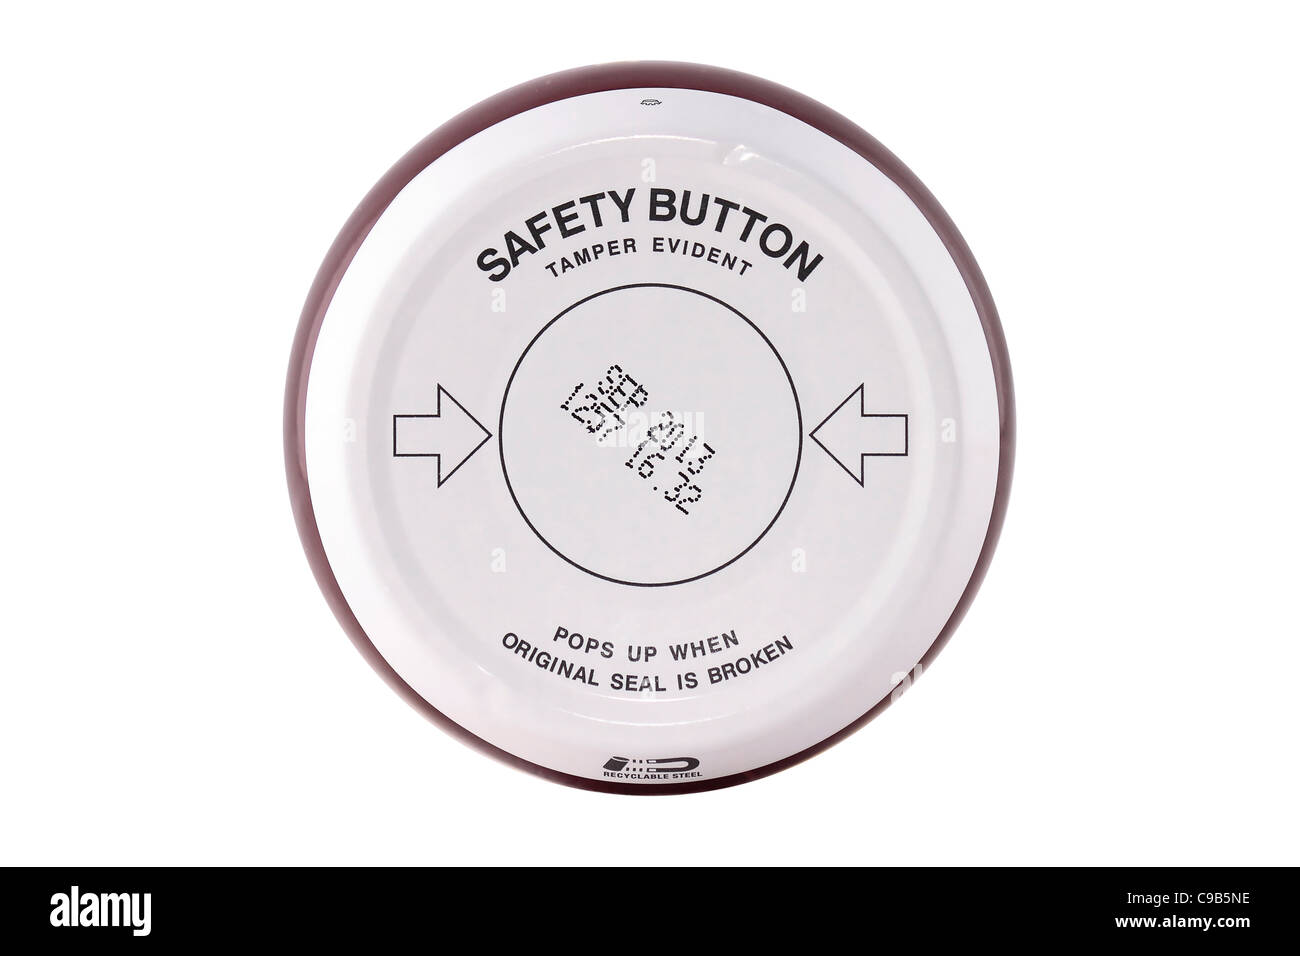 Jam jar lid viewed from above showing sell by / use by date and vacuum seal safety button Stock Photo